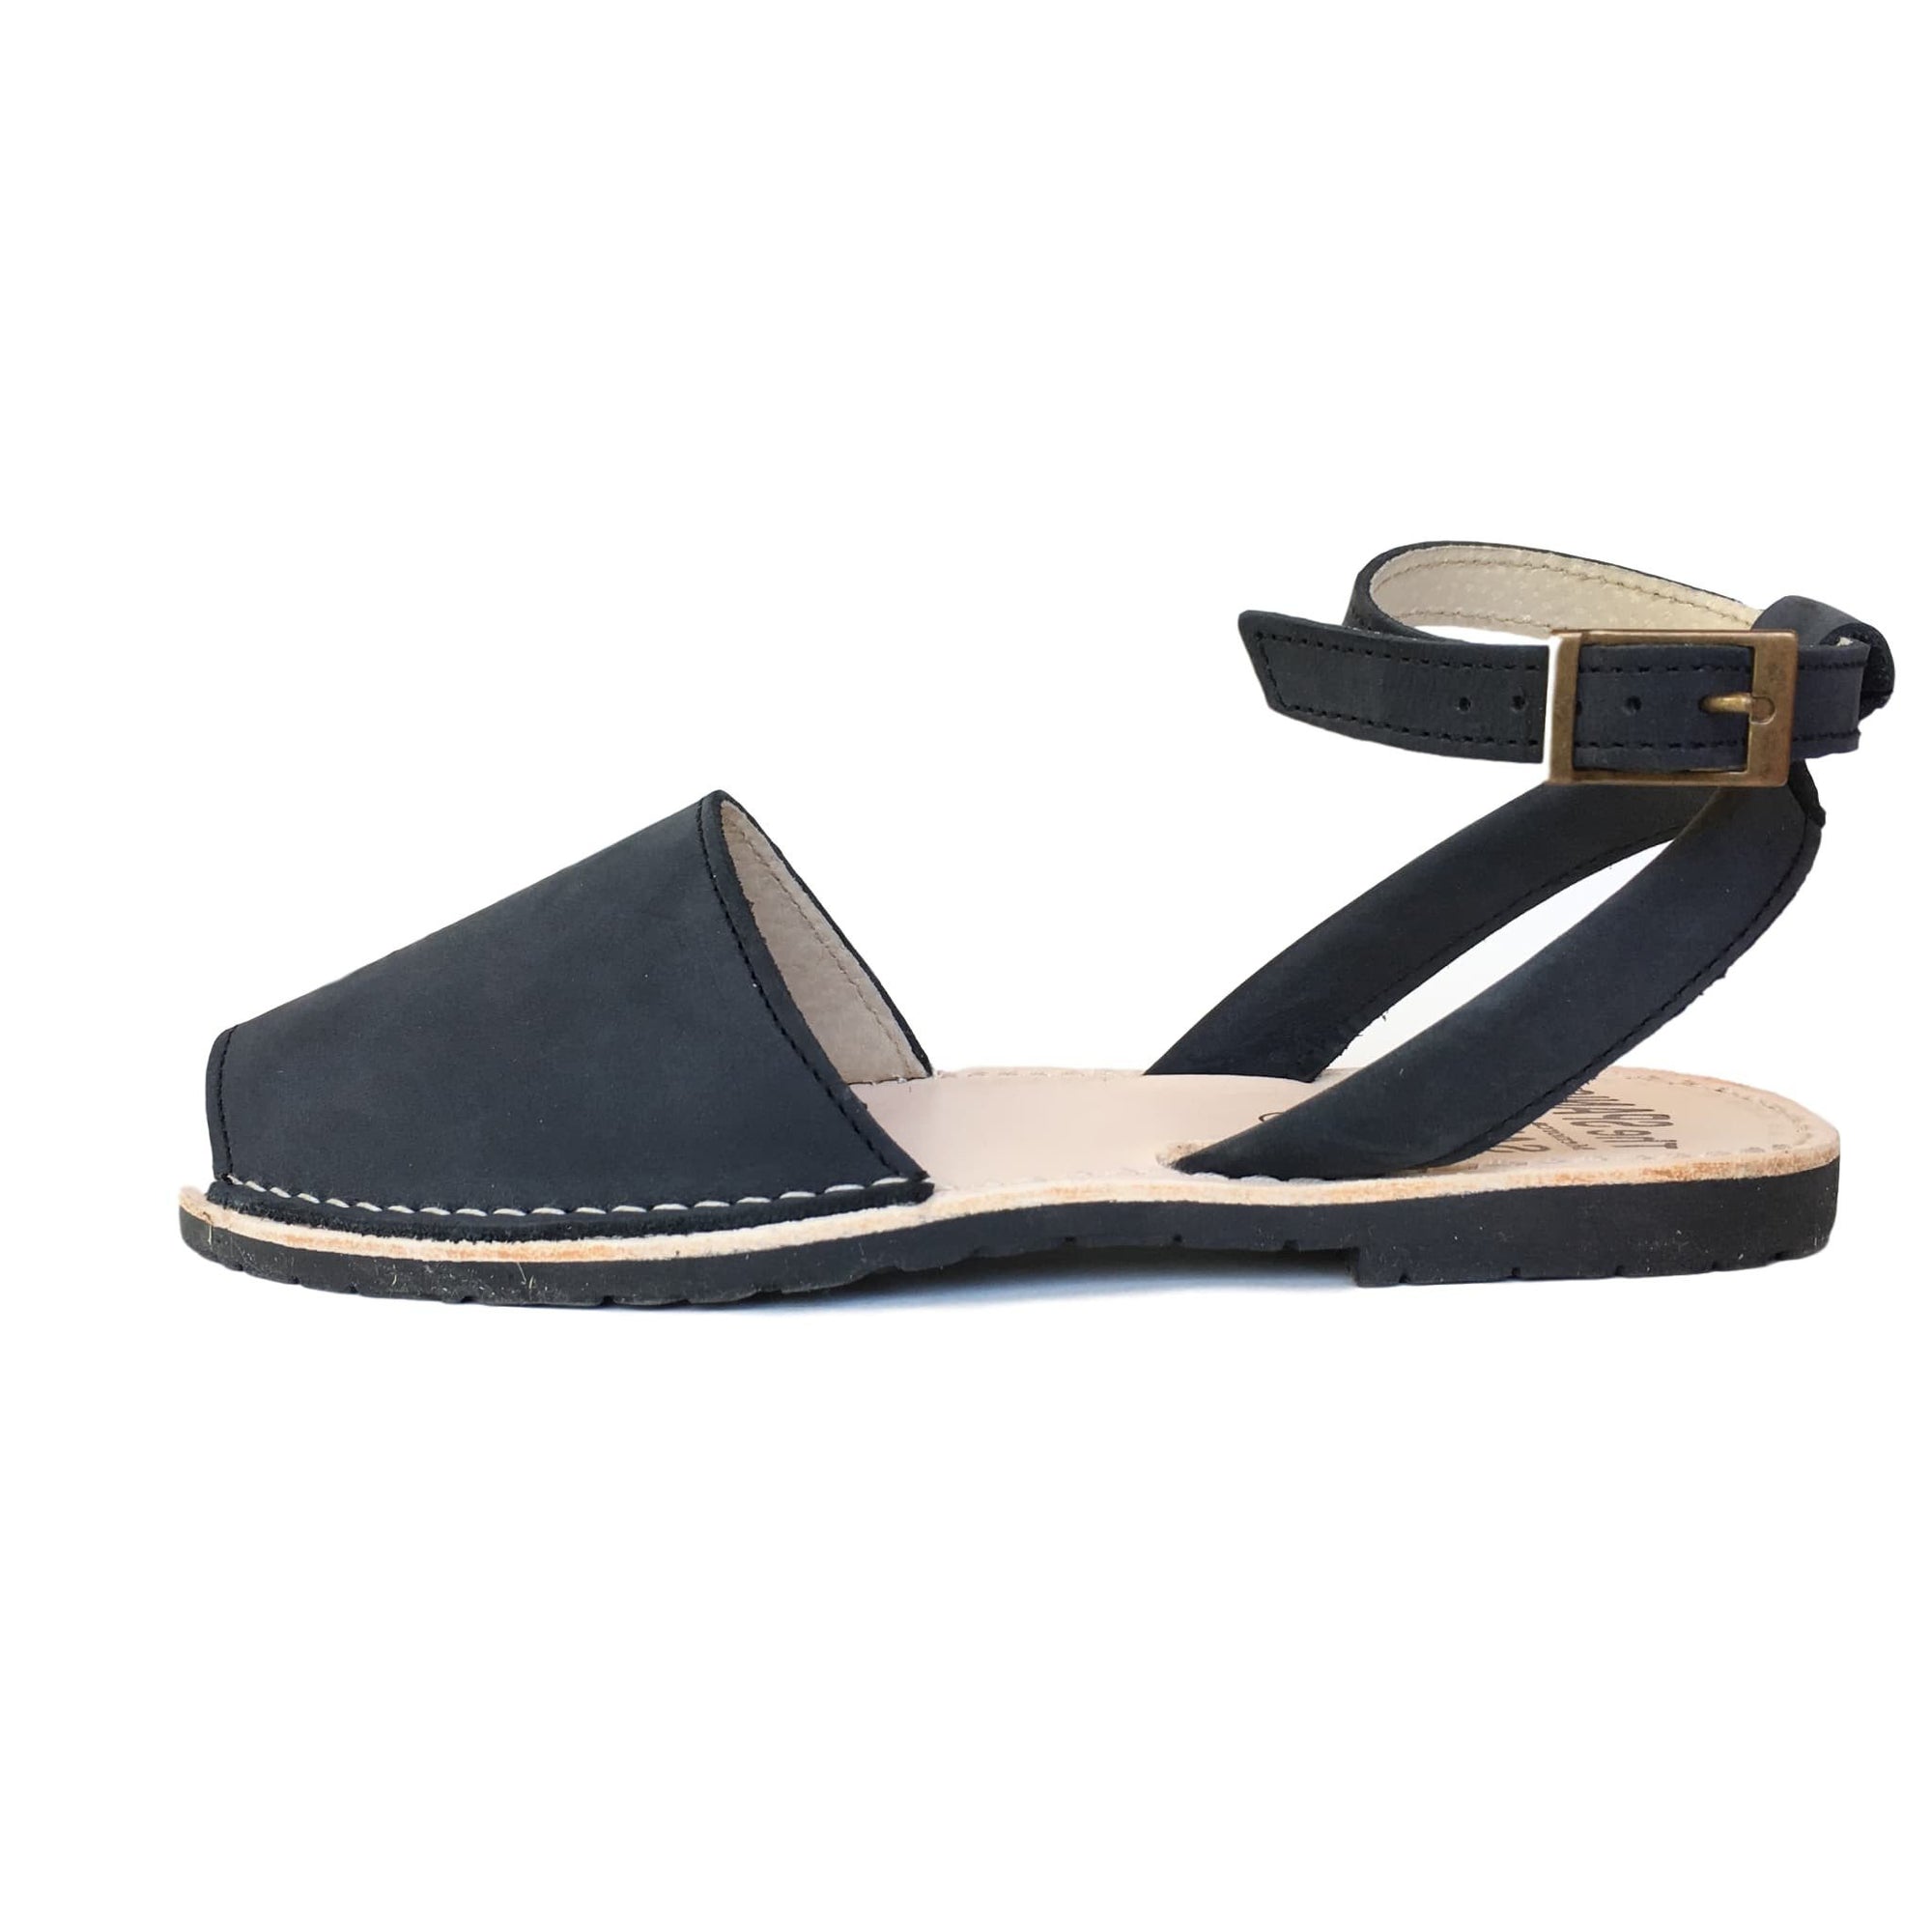  Dark blue sandals  with ankle strap Beautiful leather 